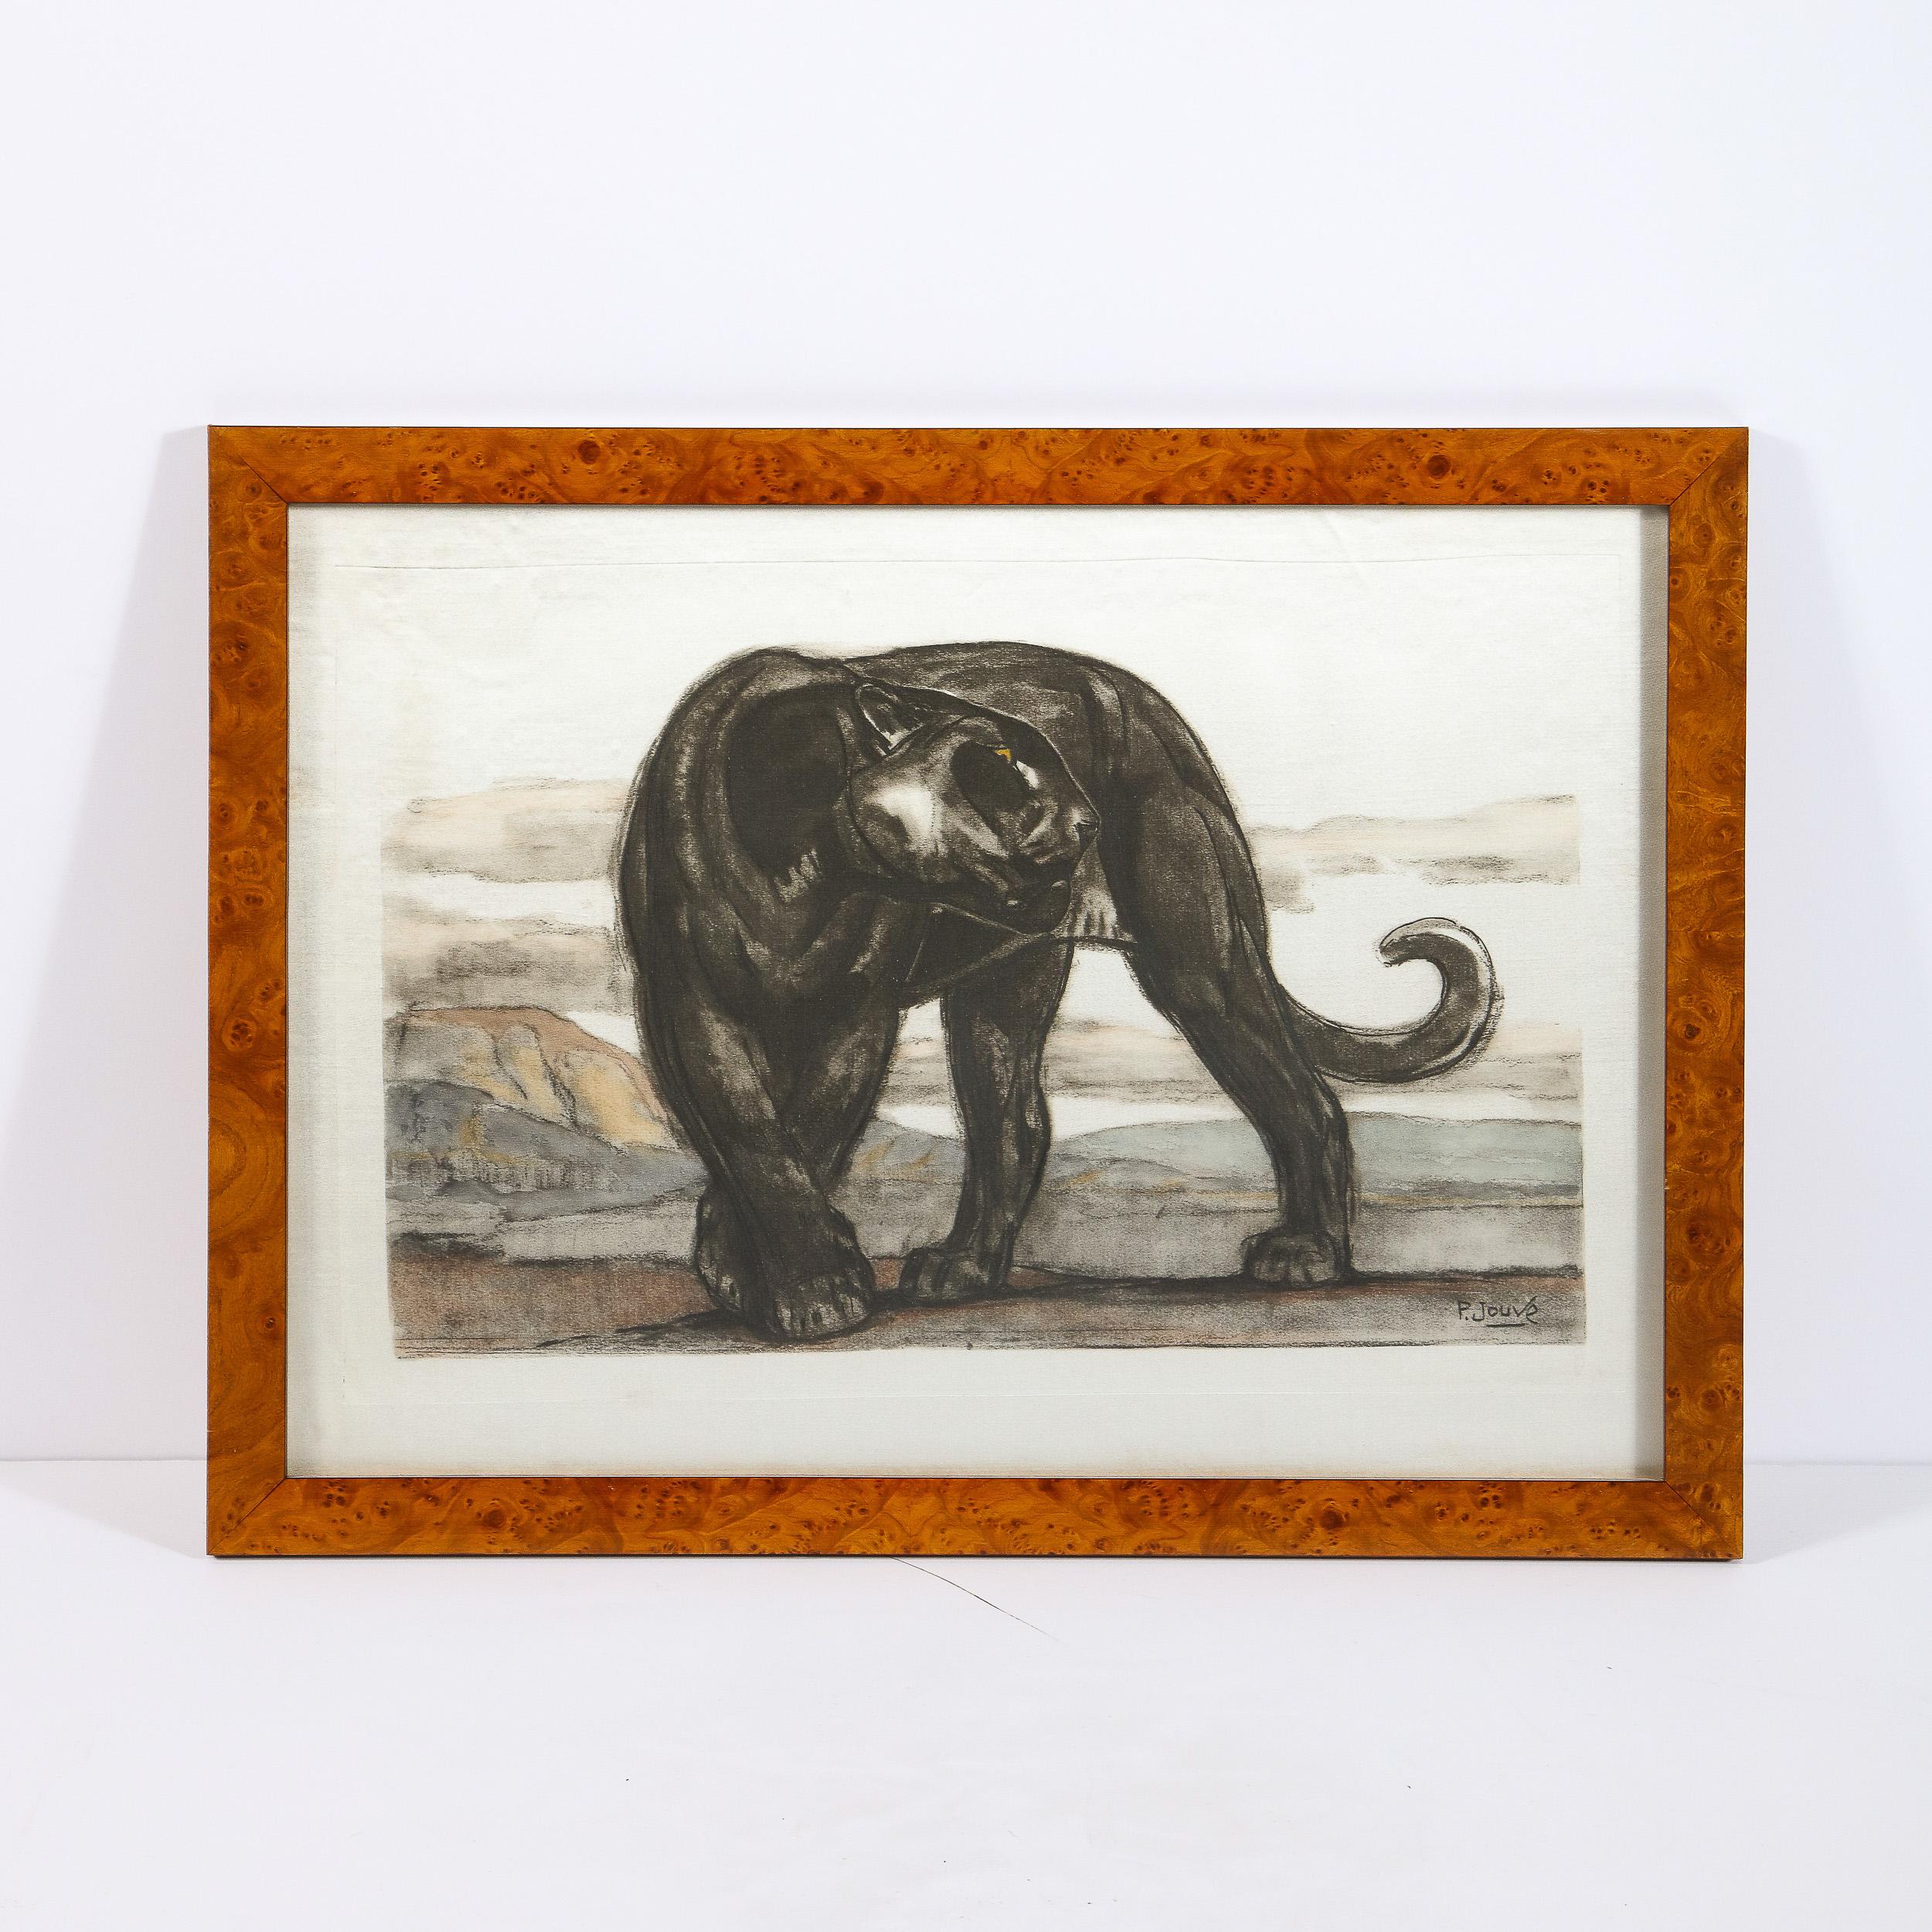 Standing Panther - Print by Pierre-Paul Jouve